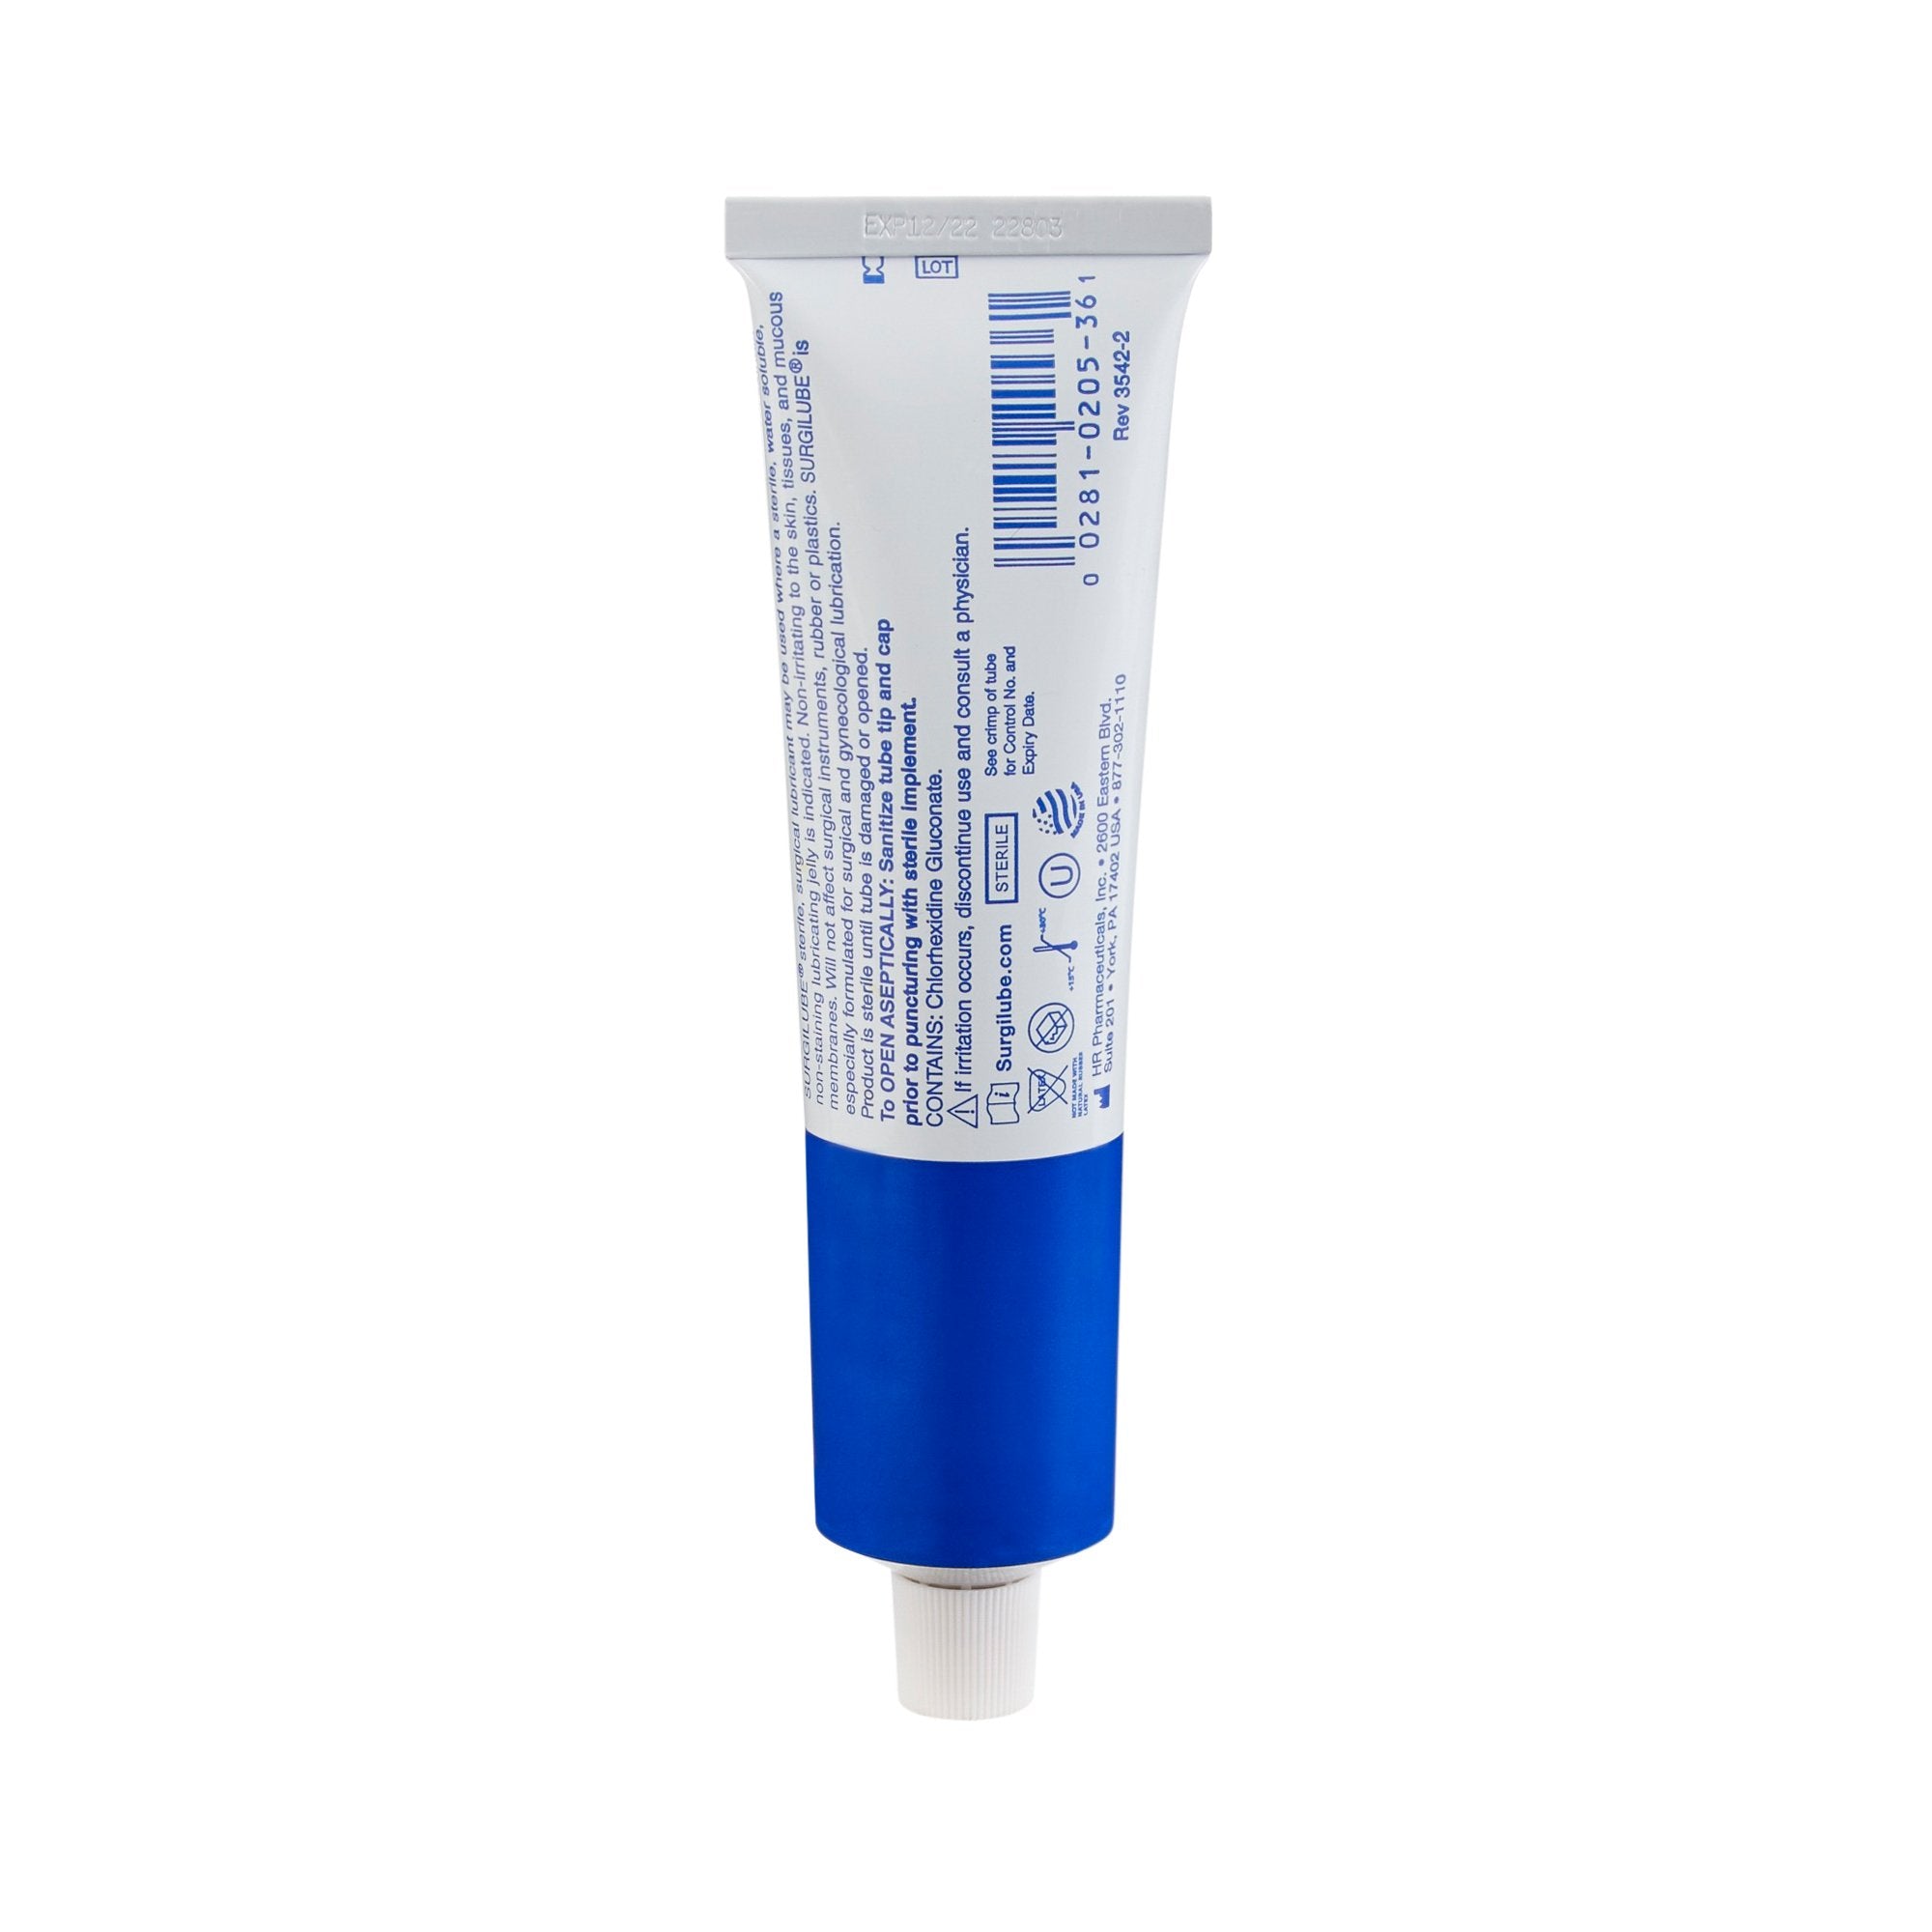 Lubricating Jelly - Carbomer free Surgilube 4.25 oz. Tube Sterile